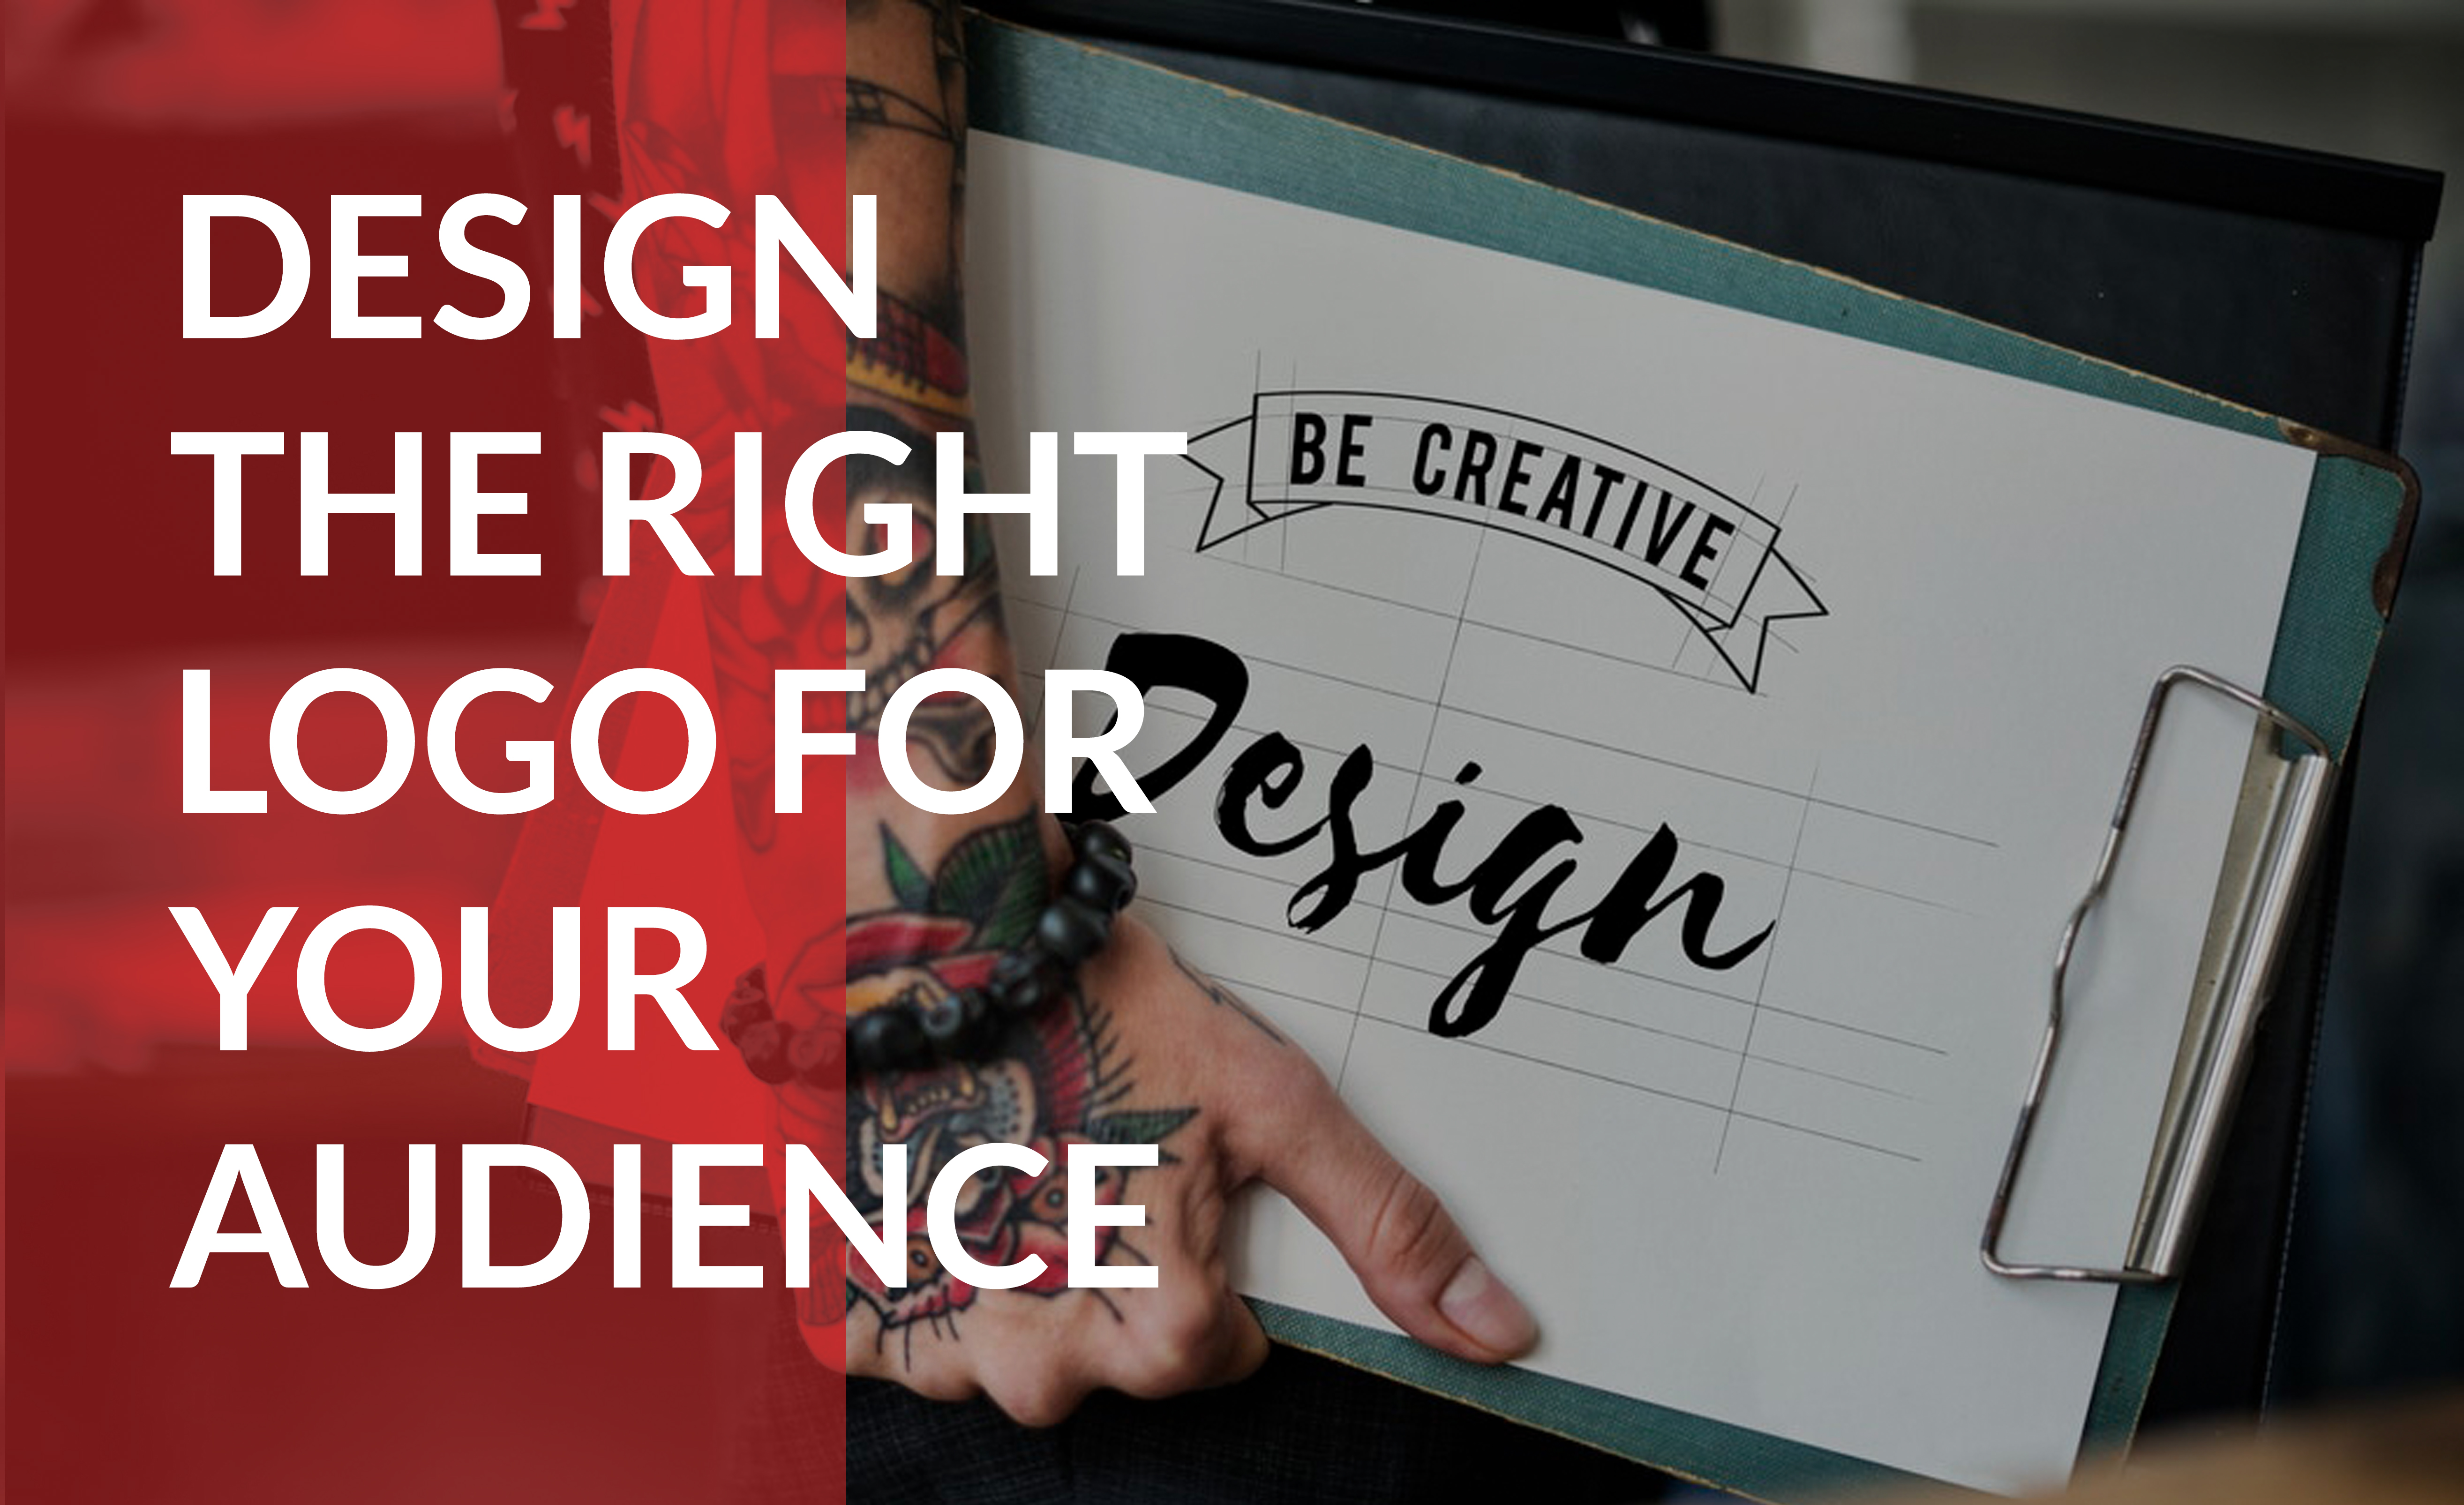 Design a logo for your business that speaks to the right audience.